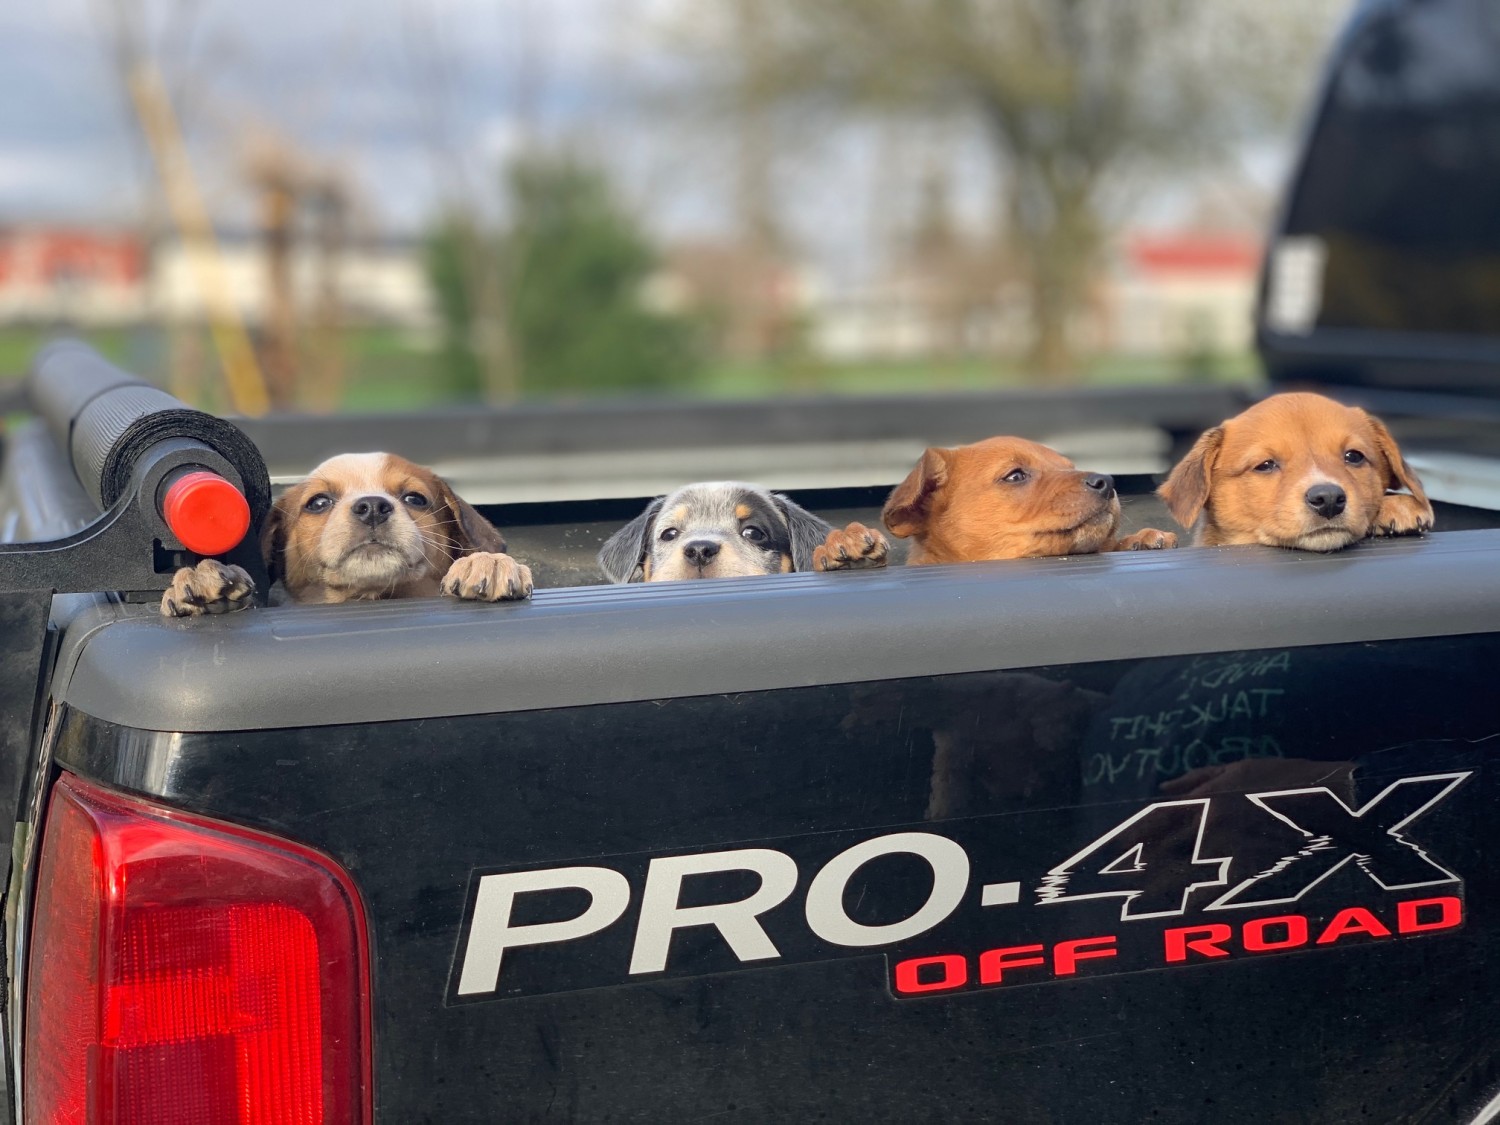 Puppies in a truck